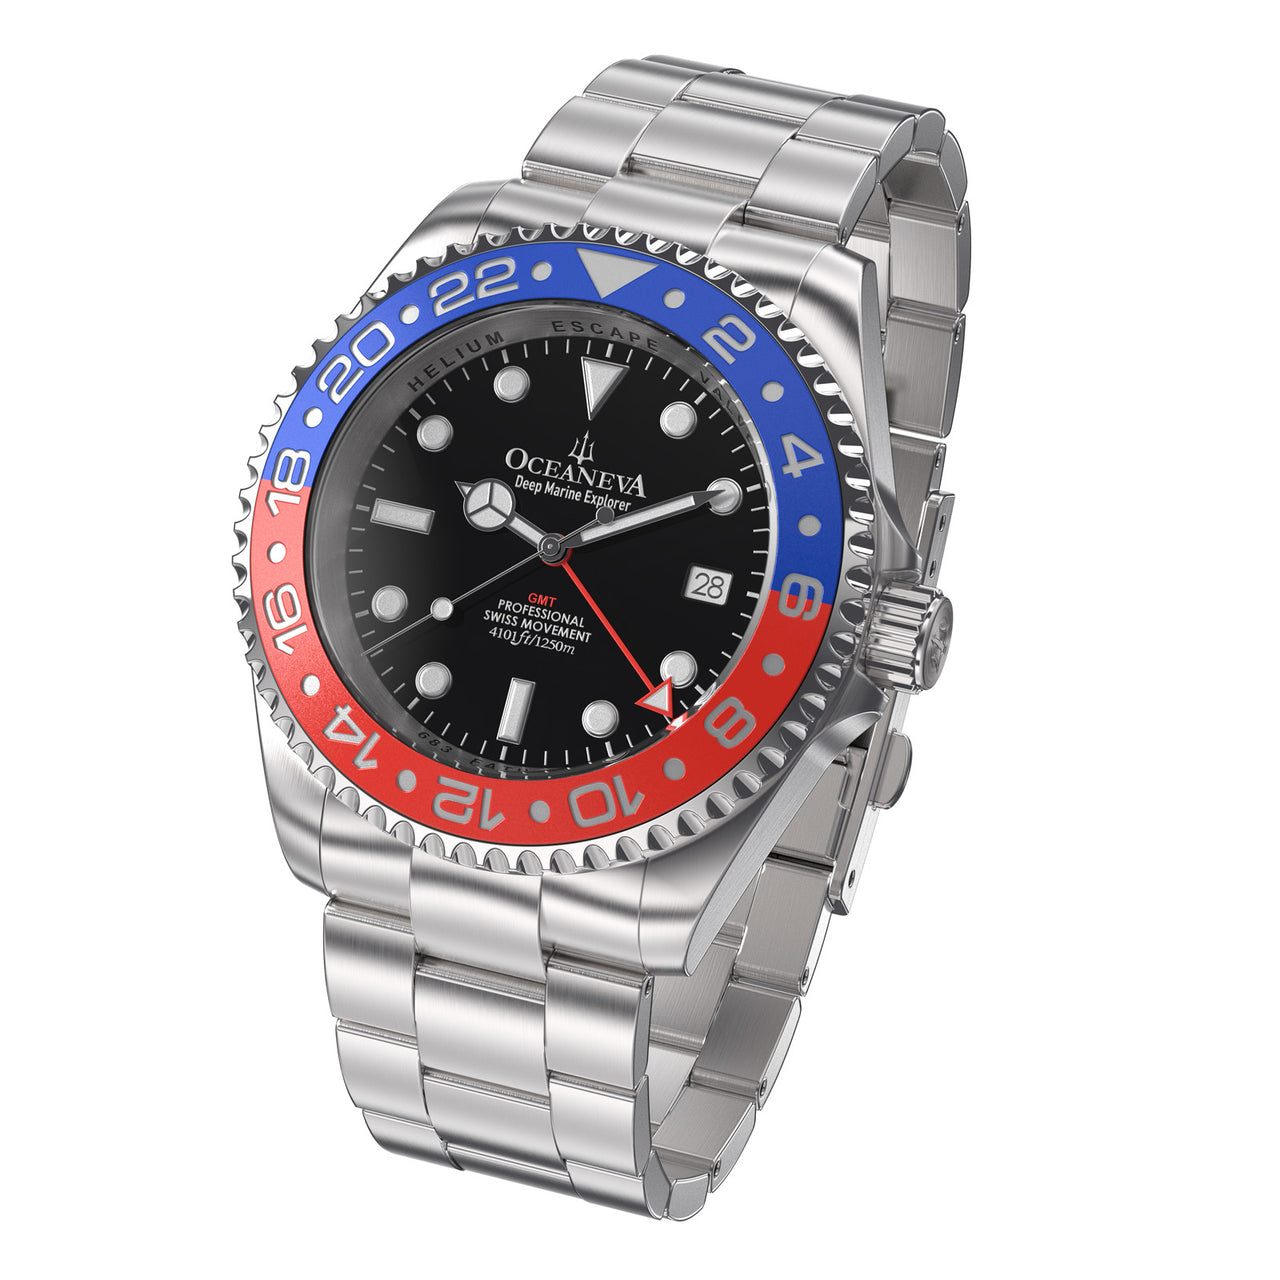 Oceaneva 1250M GMT Dive Watch Blue And Red Front Picture Slight Left Slant View